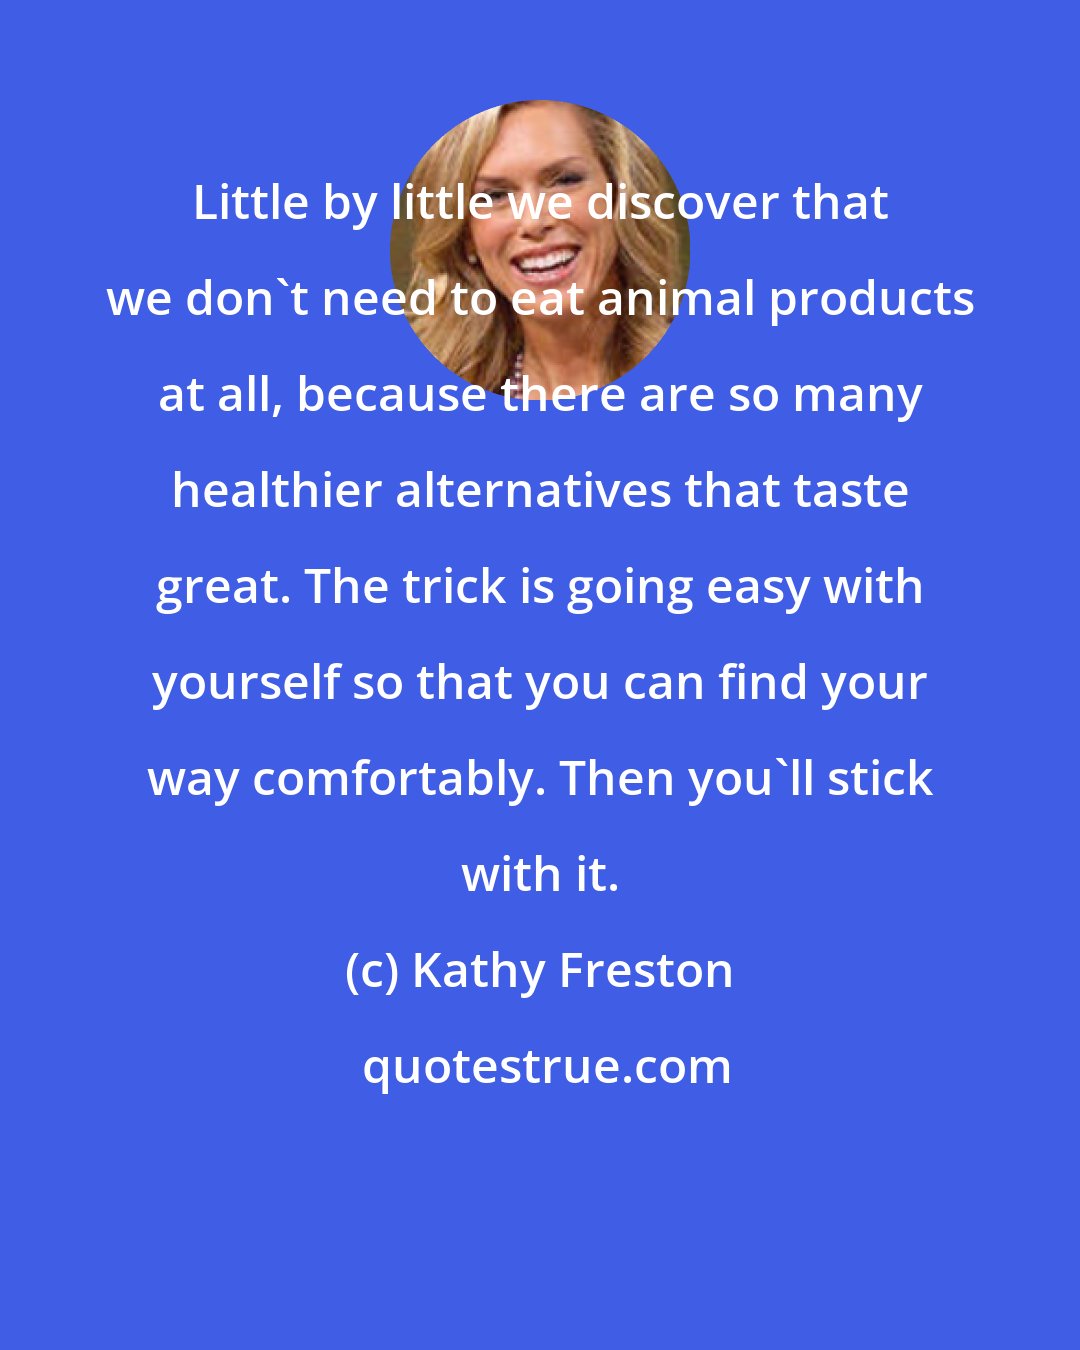 Kathy Freston: Little by little we discover that we don't need to eat animal products at all, because there are so many healthier alternatives that taste great. The trick is going easy with yourself so that you can find your way comfortably. Then you'll stick with it.